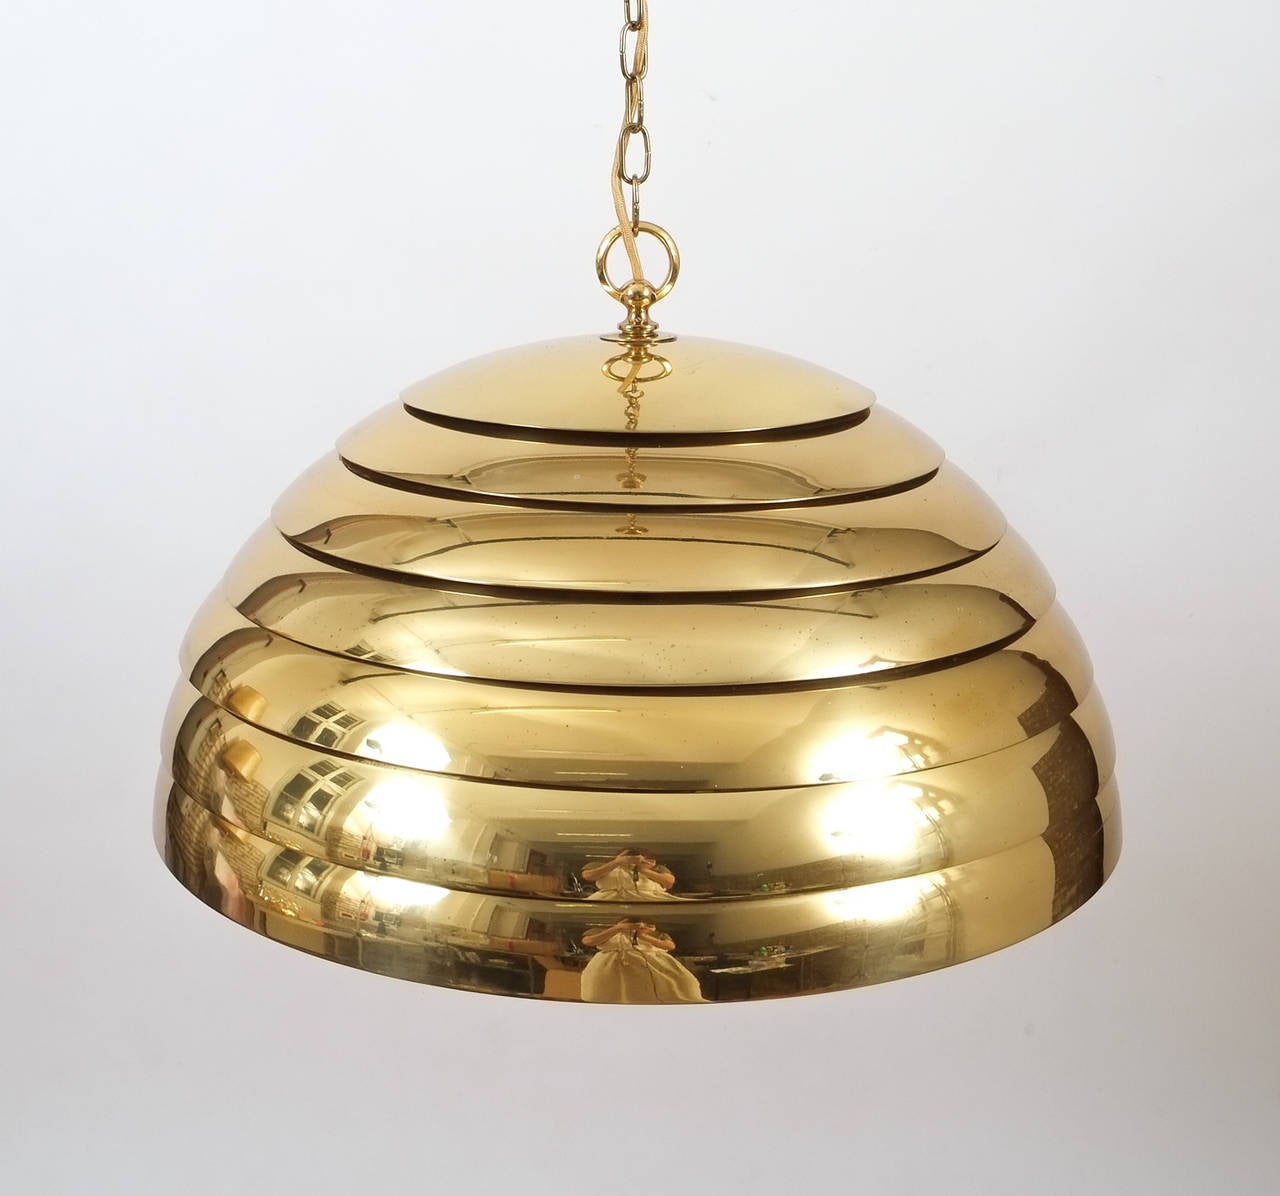 Late 20th Century Florian Schulz Large Behive Brass Dome Pendant Lamp Translucent Diffuser, 1960